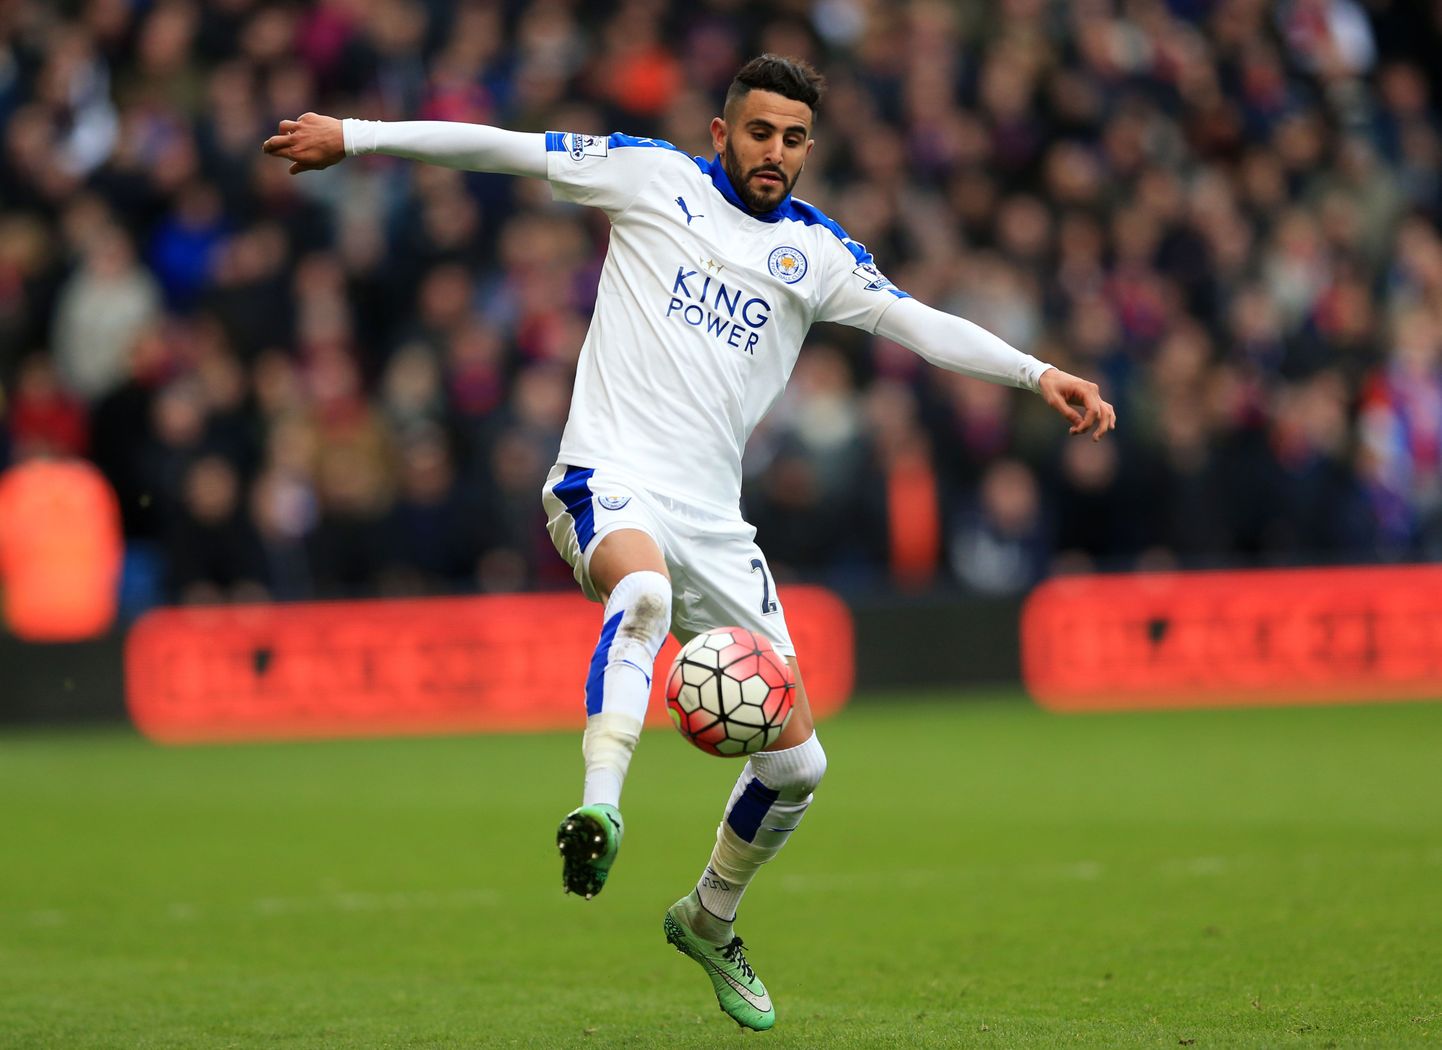 Leicester City's Riyad Mahrez during the Barclays Premier League match at Selhurst Park, London. PRESS ASSOCIATION Photo. Picture date: Saturday March 19, 2016. See PA story SOCCER Palace. Photo credit should read: Adam Davy/PA Wire. RESTRICTIONS: EDITORIAL USE ONLY No use with unauthorised audio, video, data, fixture lists, club/league logos or "live" services. Online in-match use limited to 75 images, no video emulation. No use in betting, games or single club/league/player publications.